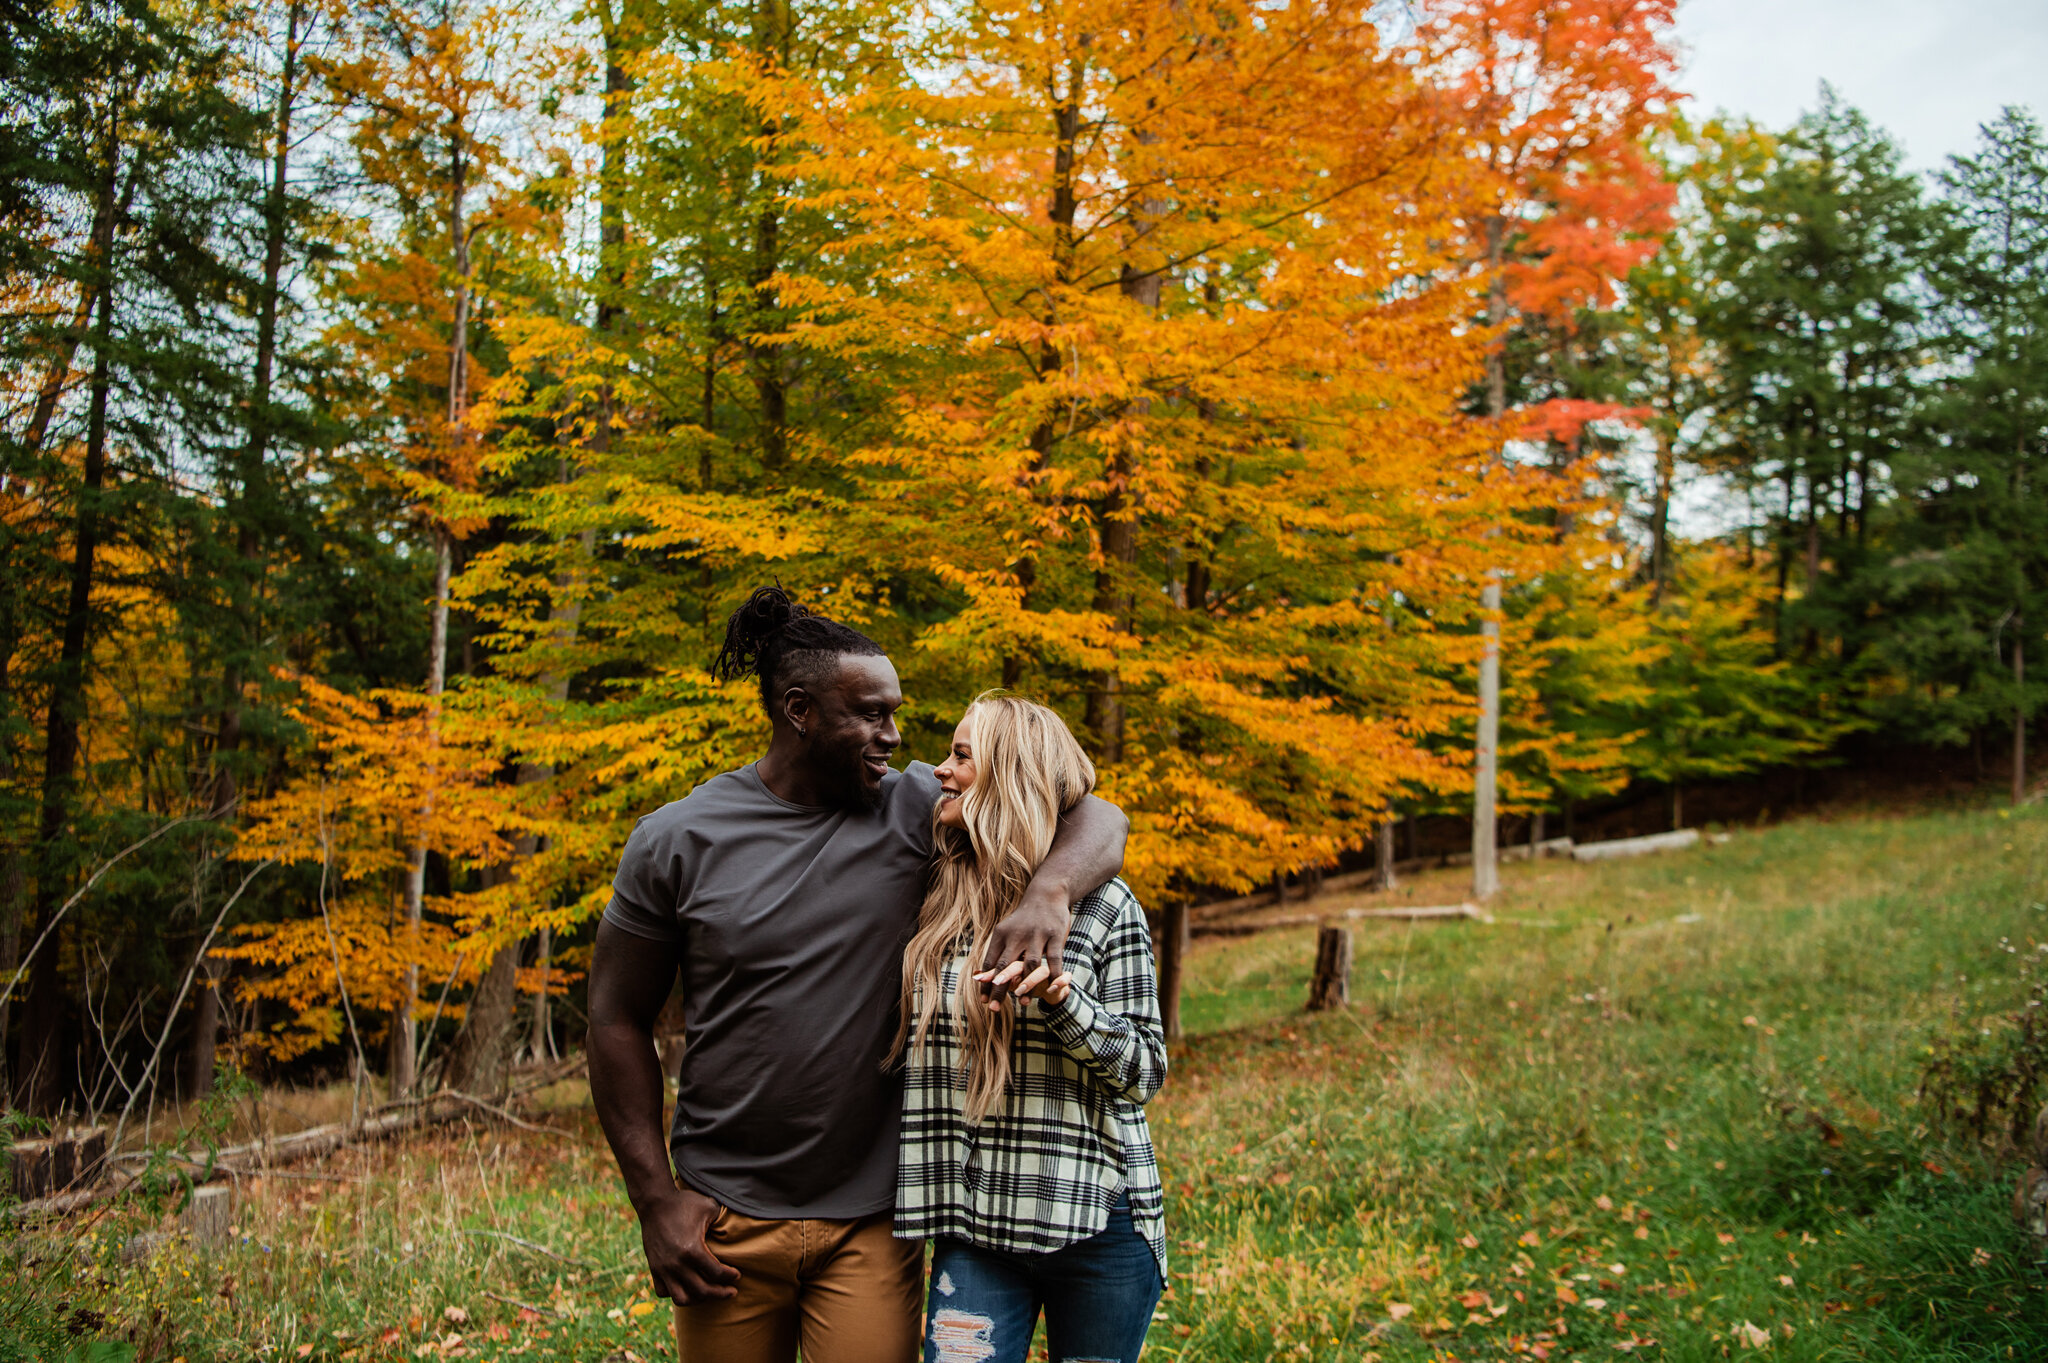 Letchworth_State_Park_Rochester_Couples_Session_JILL_STUDIO_Rochester_NY_Photographer_9456.jpg